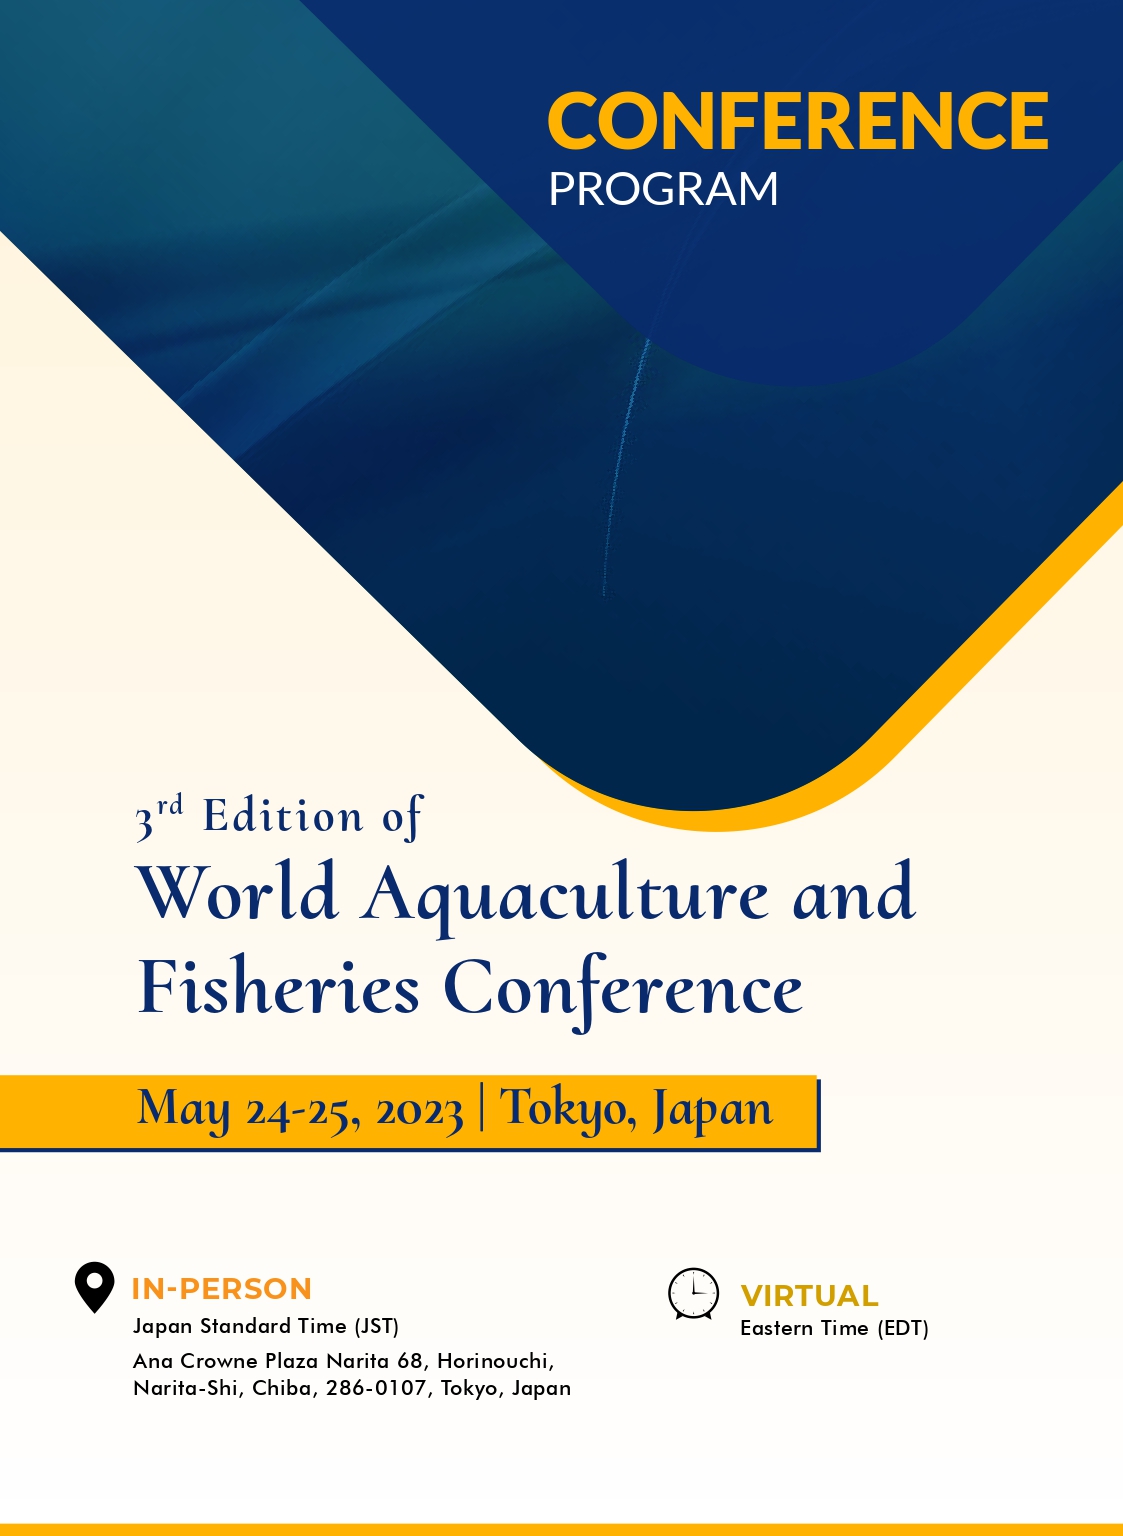 3rd Edition of World Aquaculture and Fisheries Conference | Tokyo, Japan Program